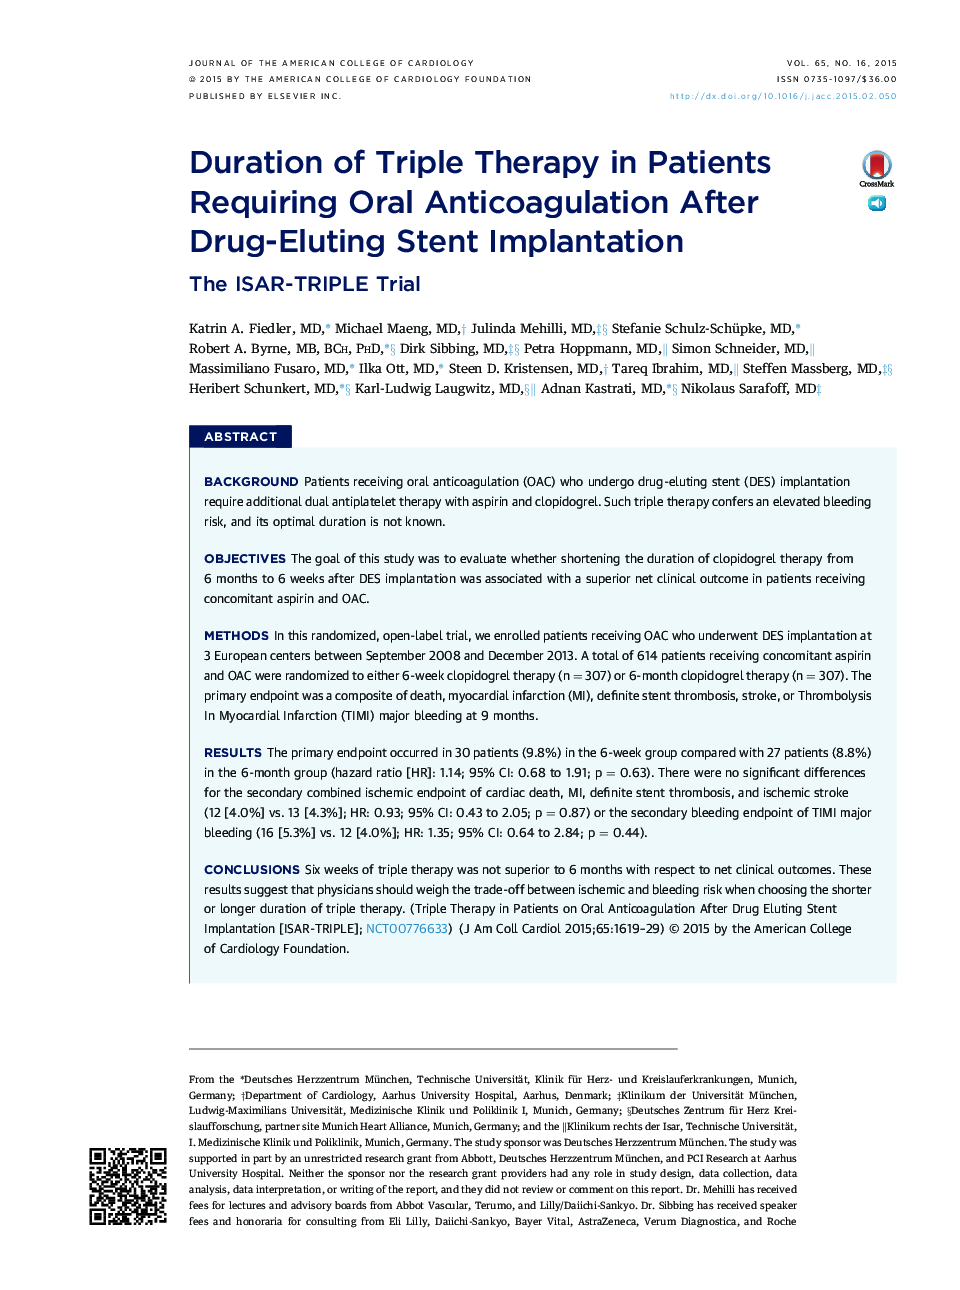 Duration of Triple Therapy in Patients Requiring Oral Anticoagulation After Drug-Eluting Stent Implantation: The ISAR-TRIPLE Trial